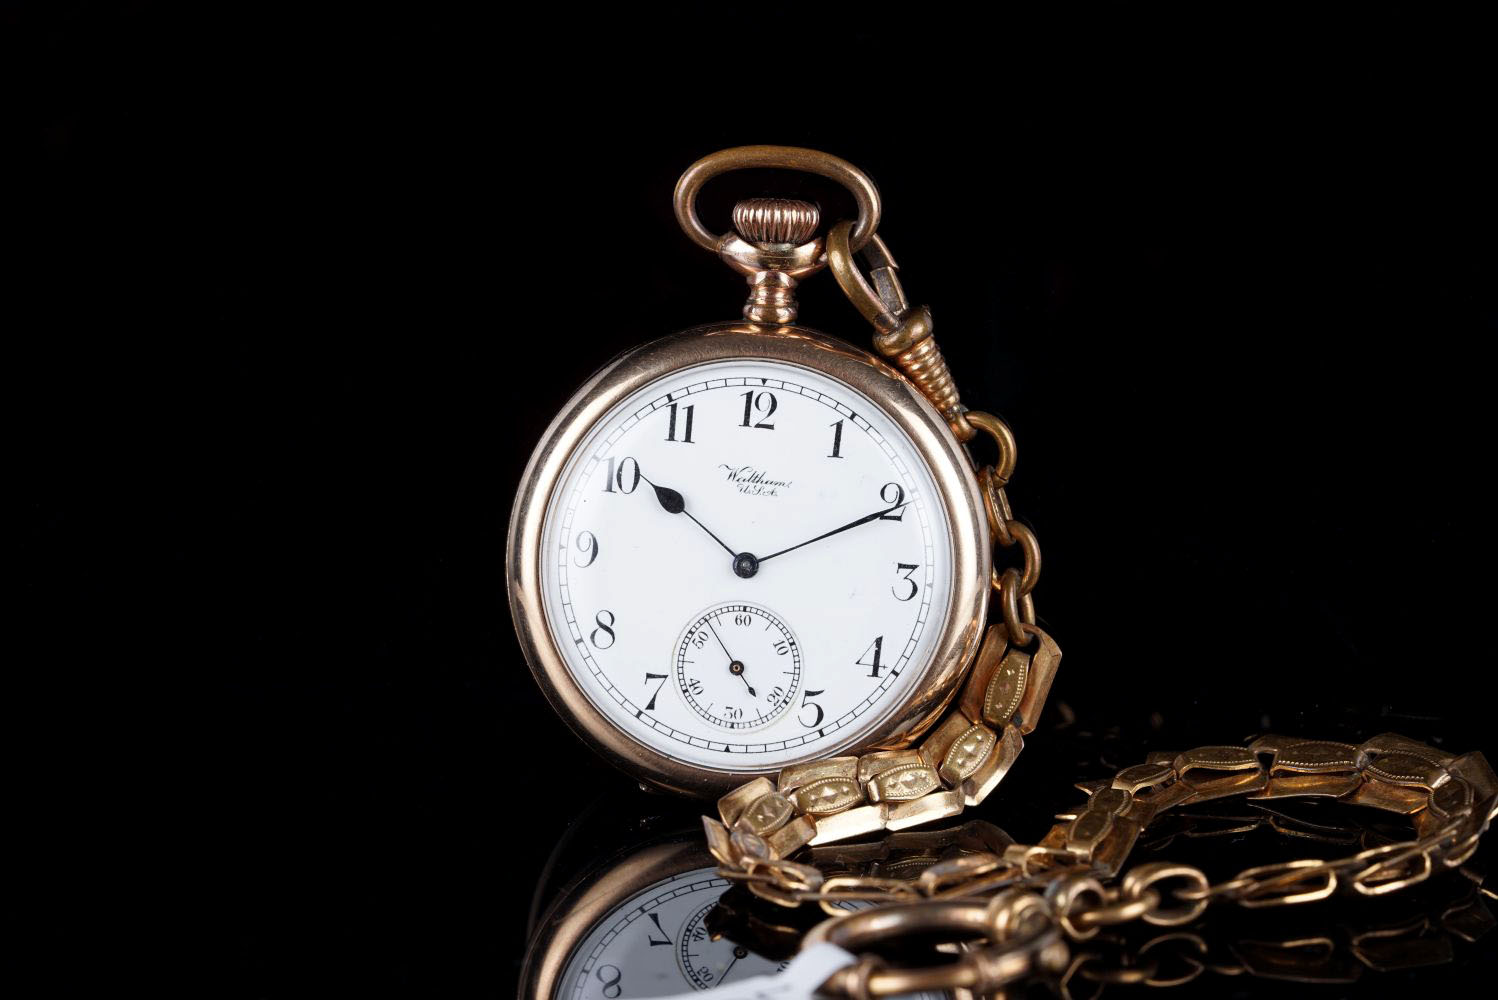 VINTAGE WALTHAM POCKET WATCH CIRCA 1920, circular white dial with black Arabic numerals and a minute